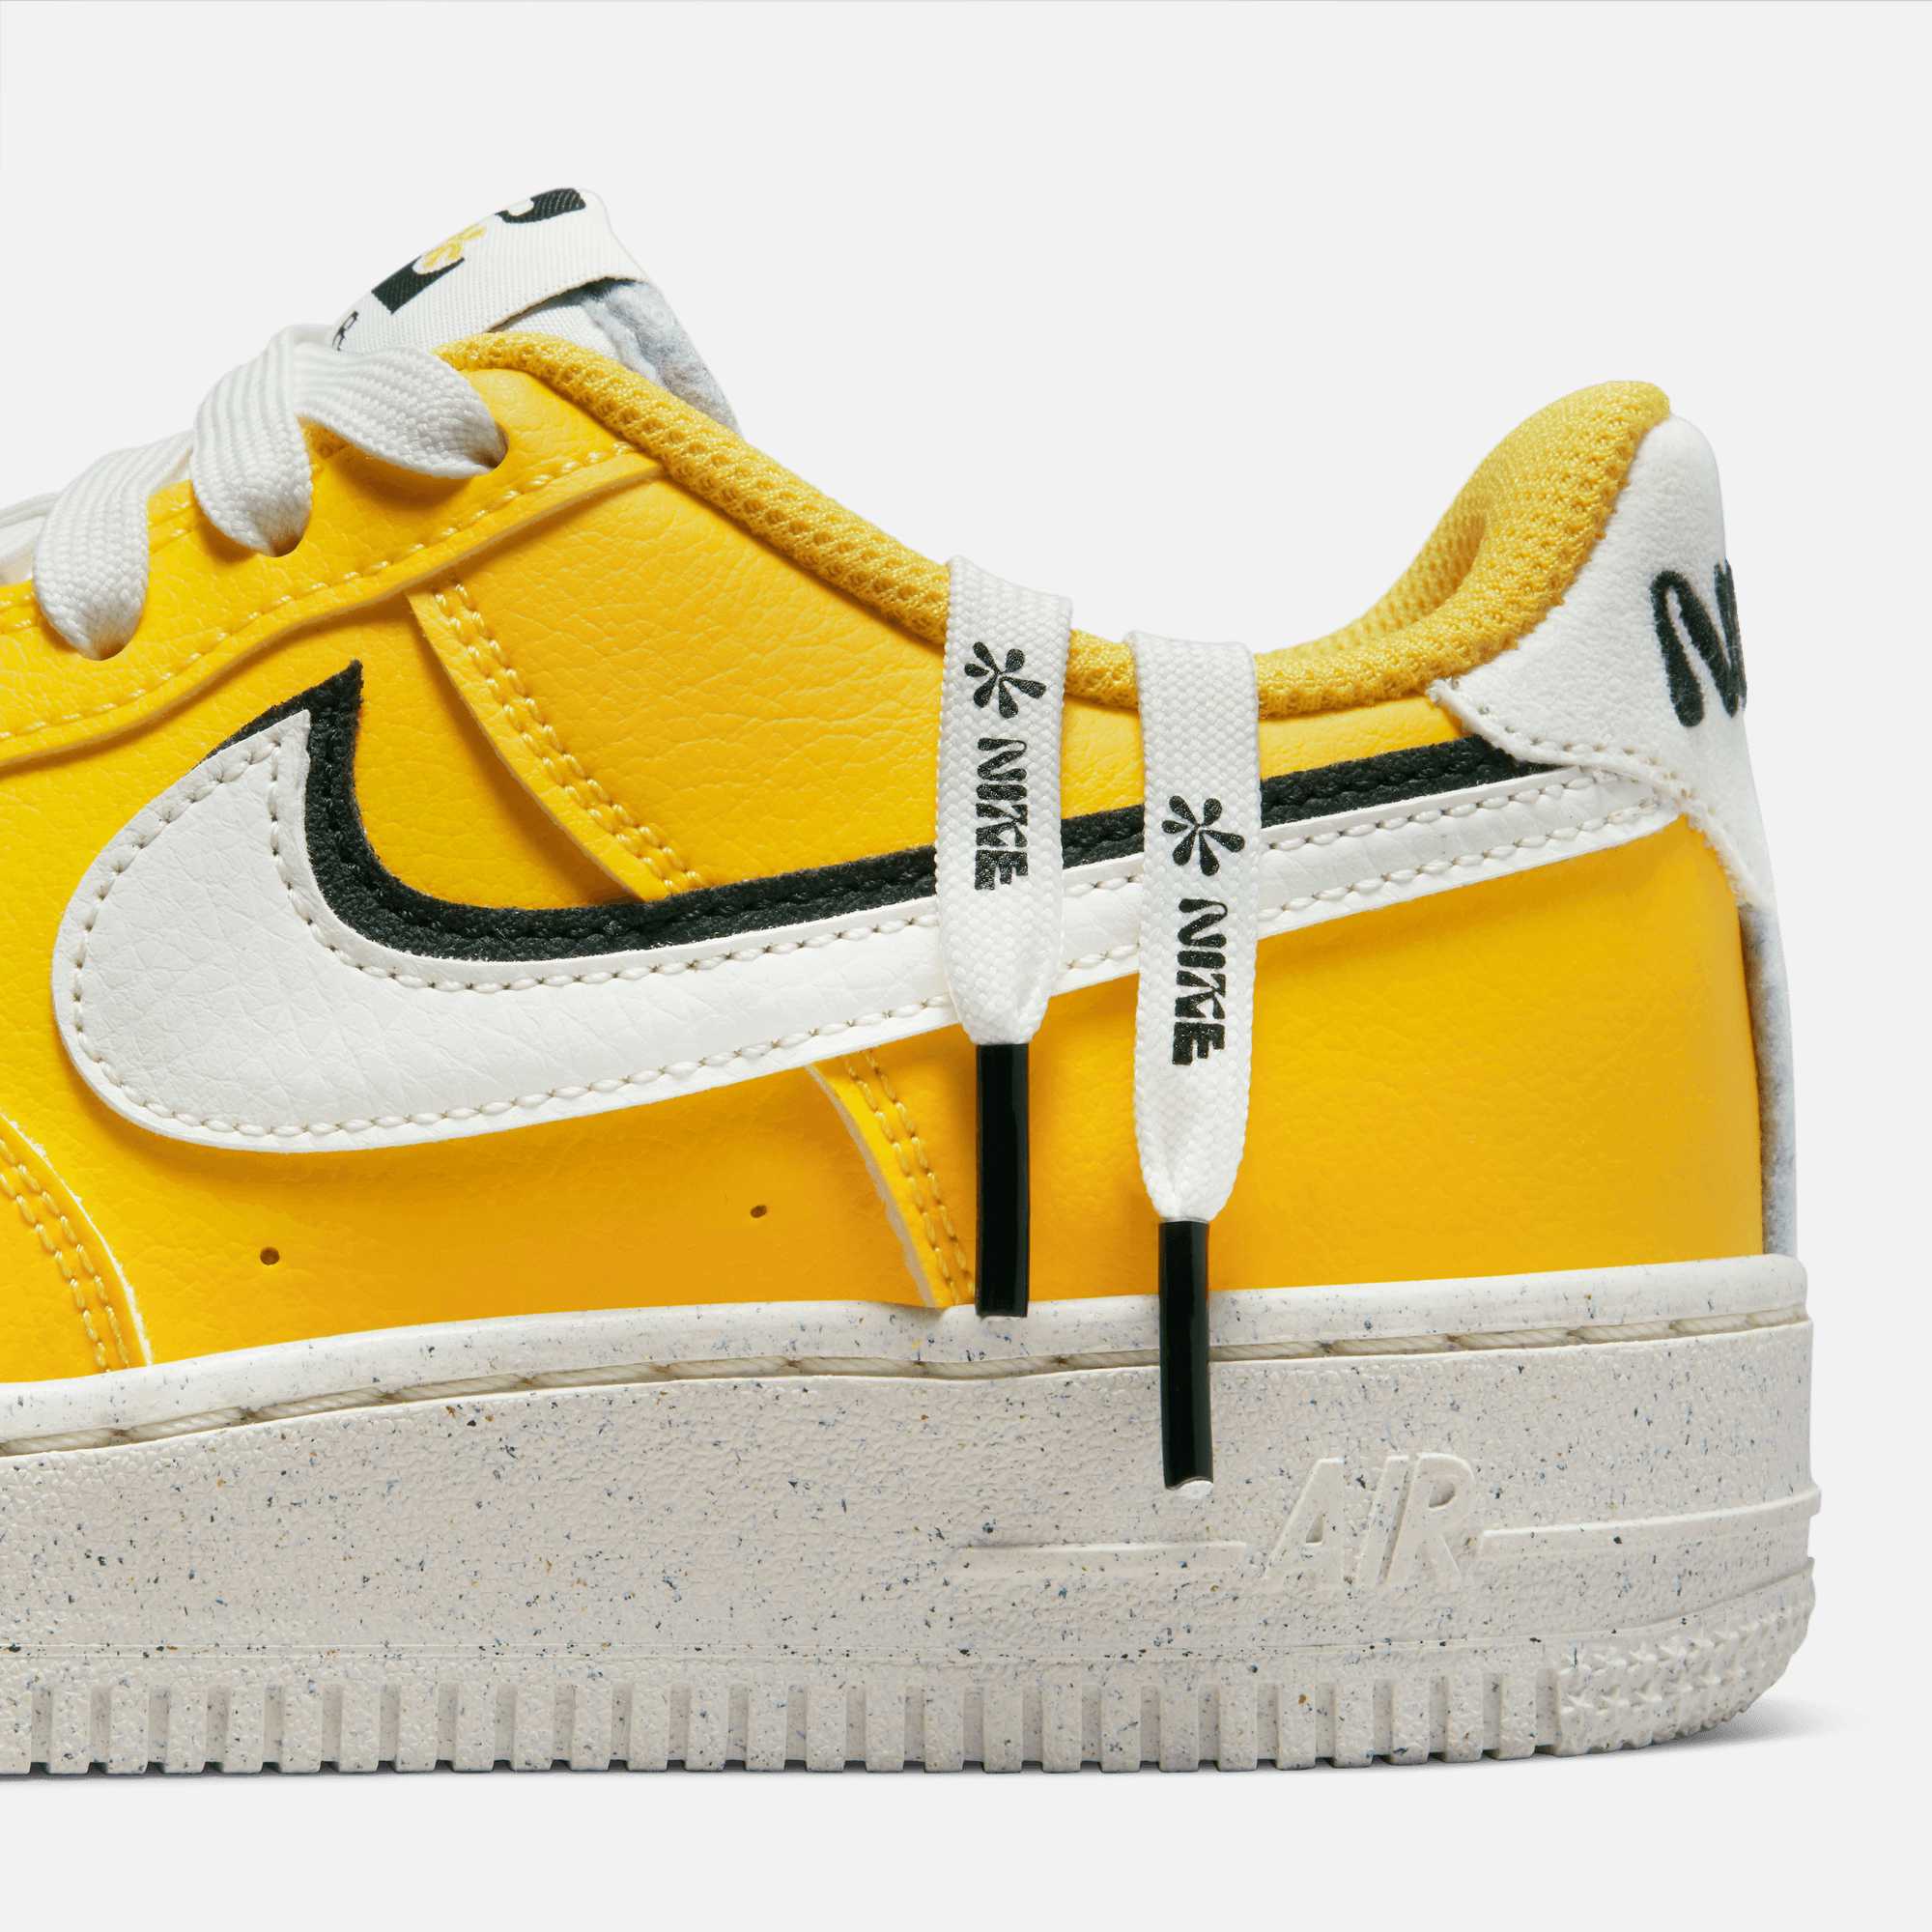 Nike Air Force 1 Low Wheat (GS) – Puffer Reds